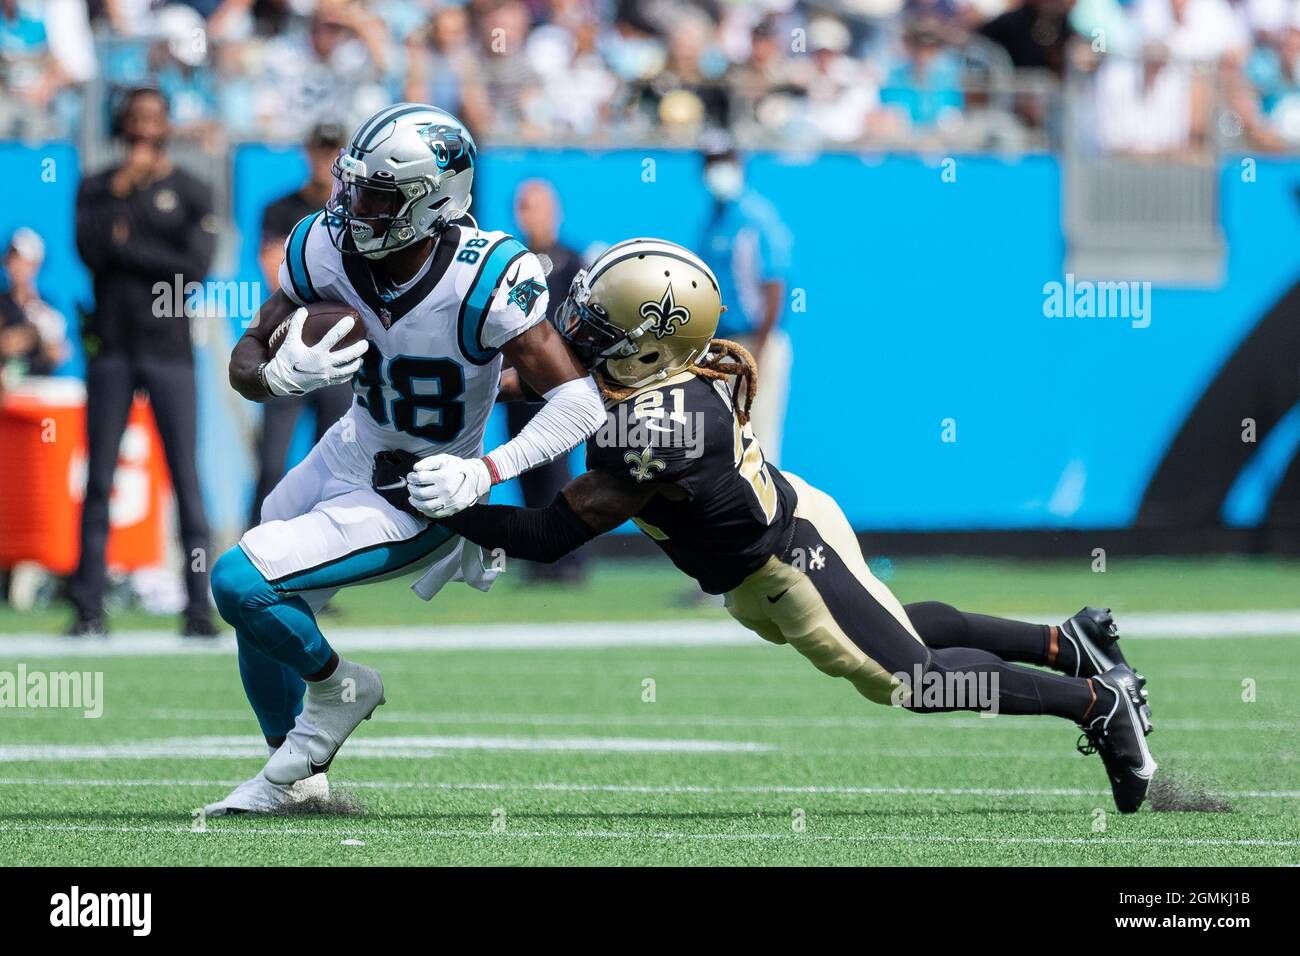 September 19, 2021: Carolina Panthers wide receiver Terrace Marshall Jr. (88) is graded by New Orleans Saints cornerback Bradley Roby (21) in the fourth quarter of the NFL matchup at Bank of America Stadium in Charlotte, NC. (Scott Kinser/Cal Sport Media) Stock Photo